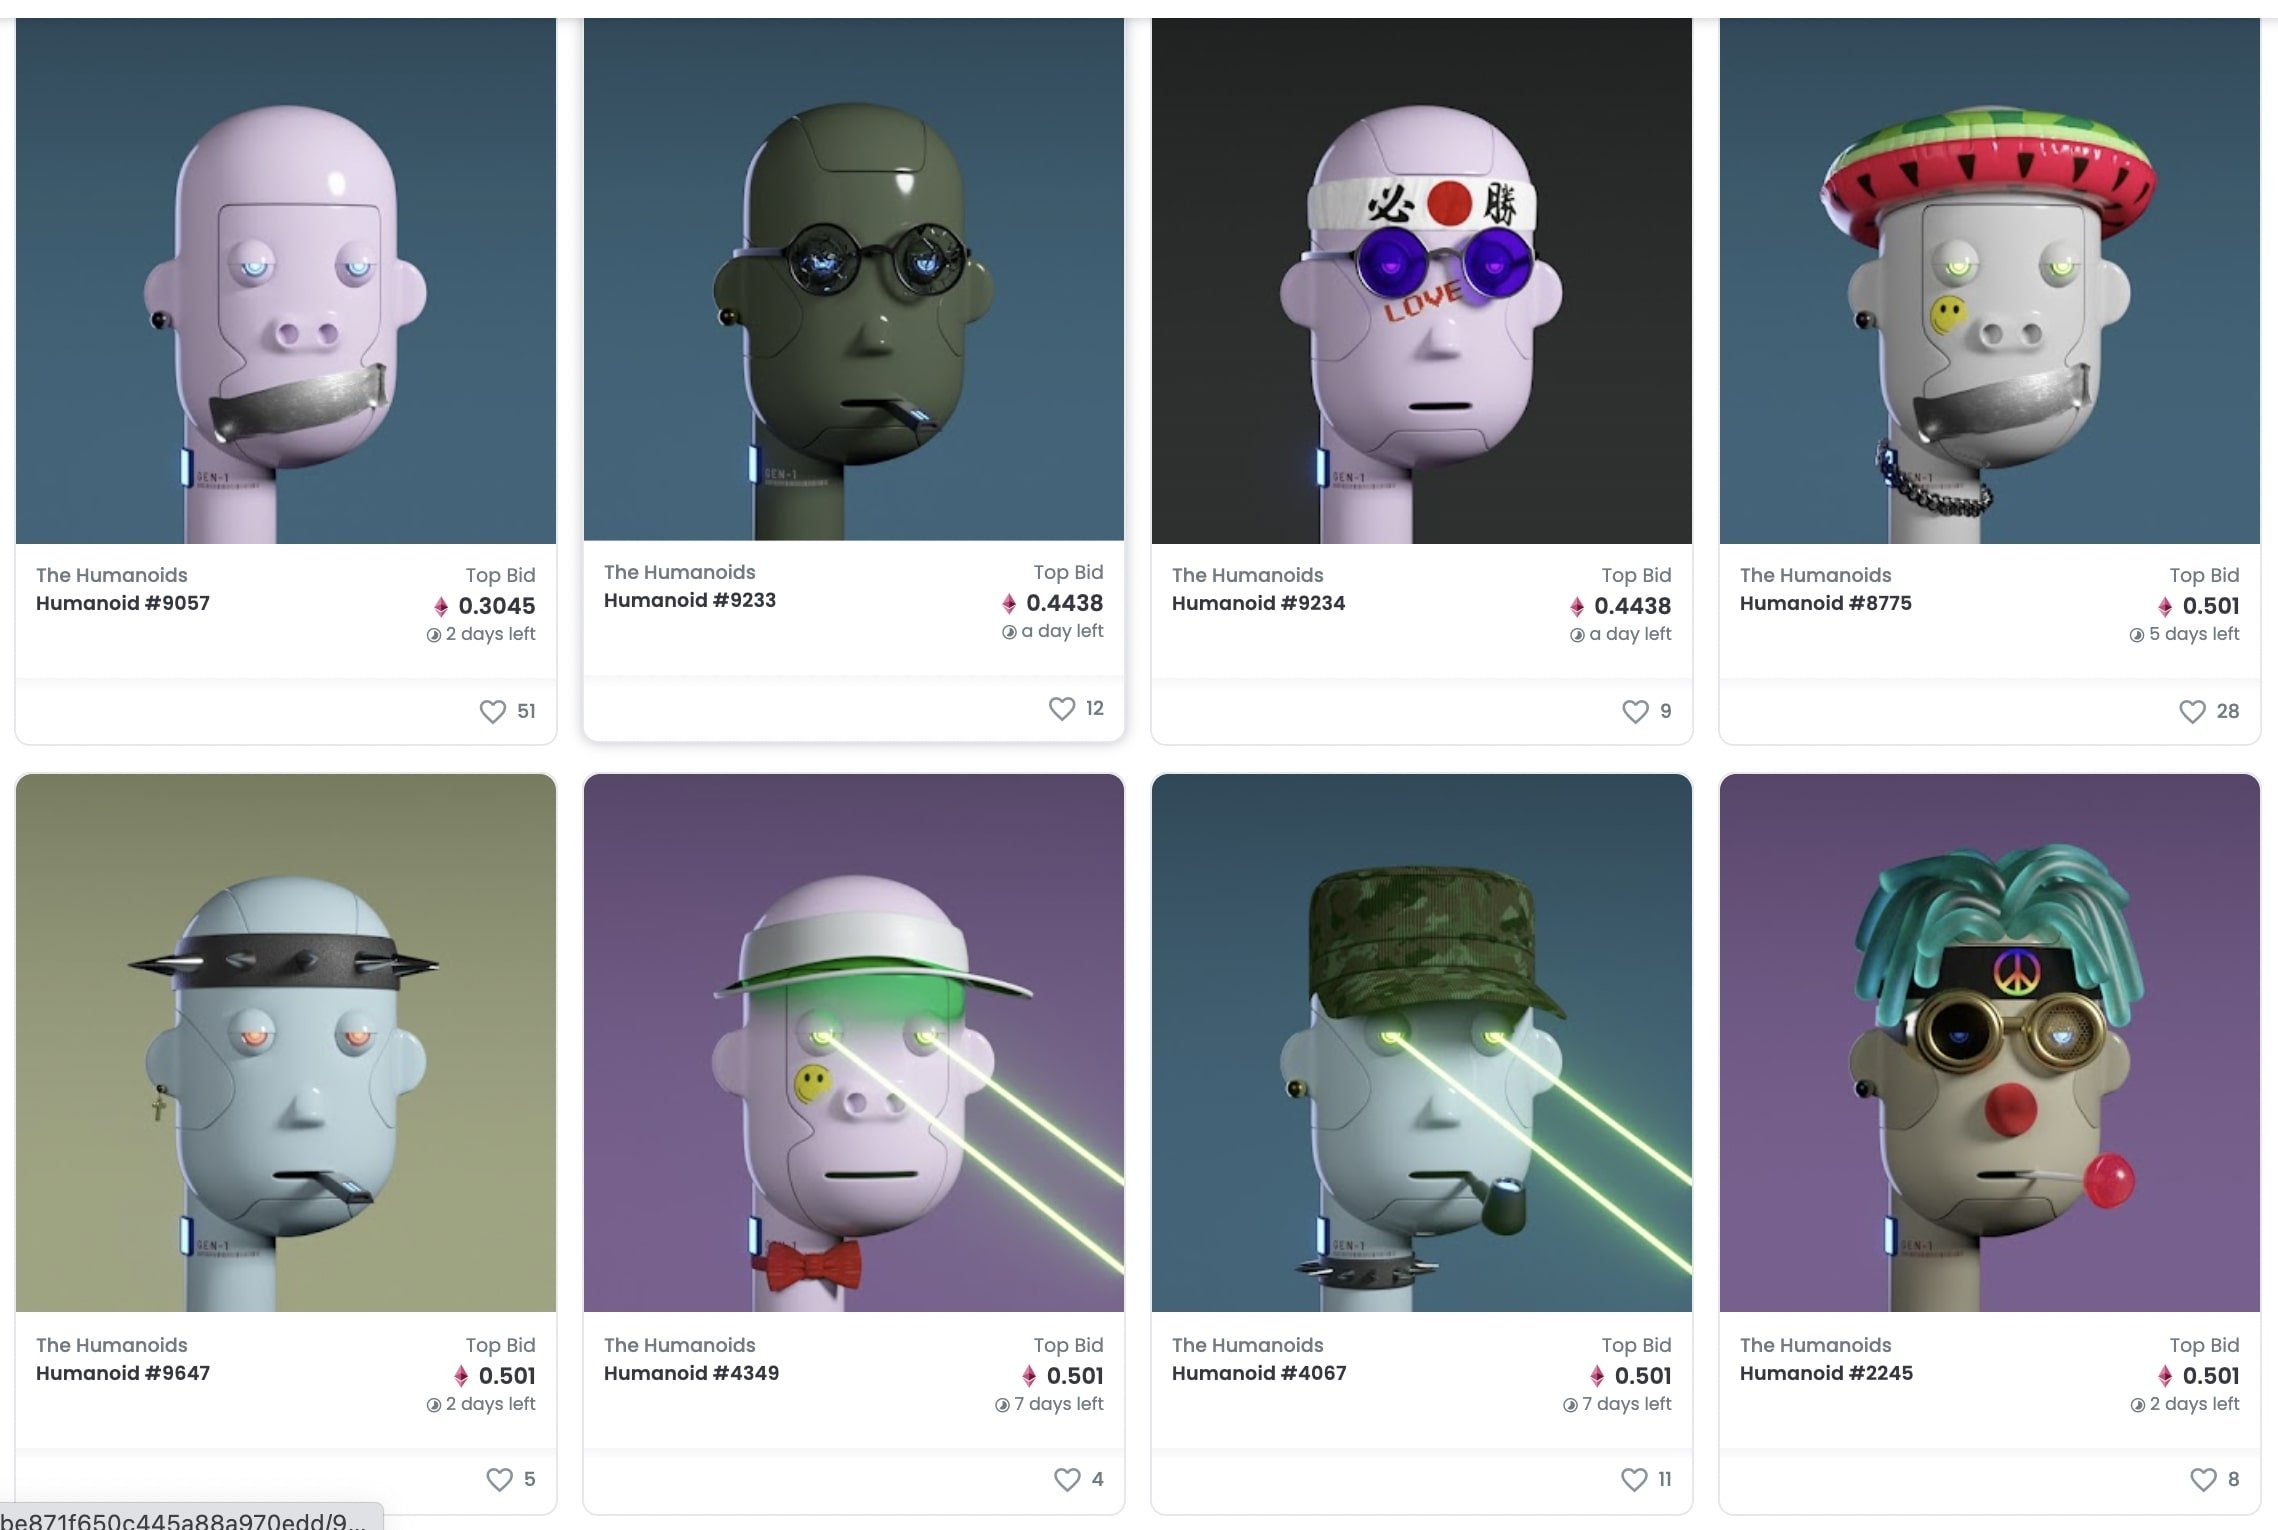 The Humanoids NFT collection on NFT marketplace OpenSea